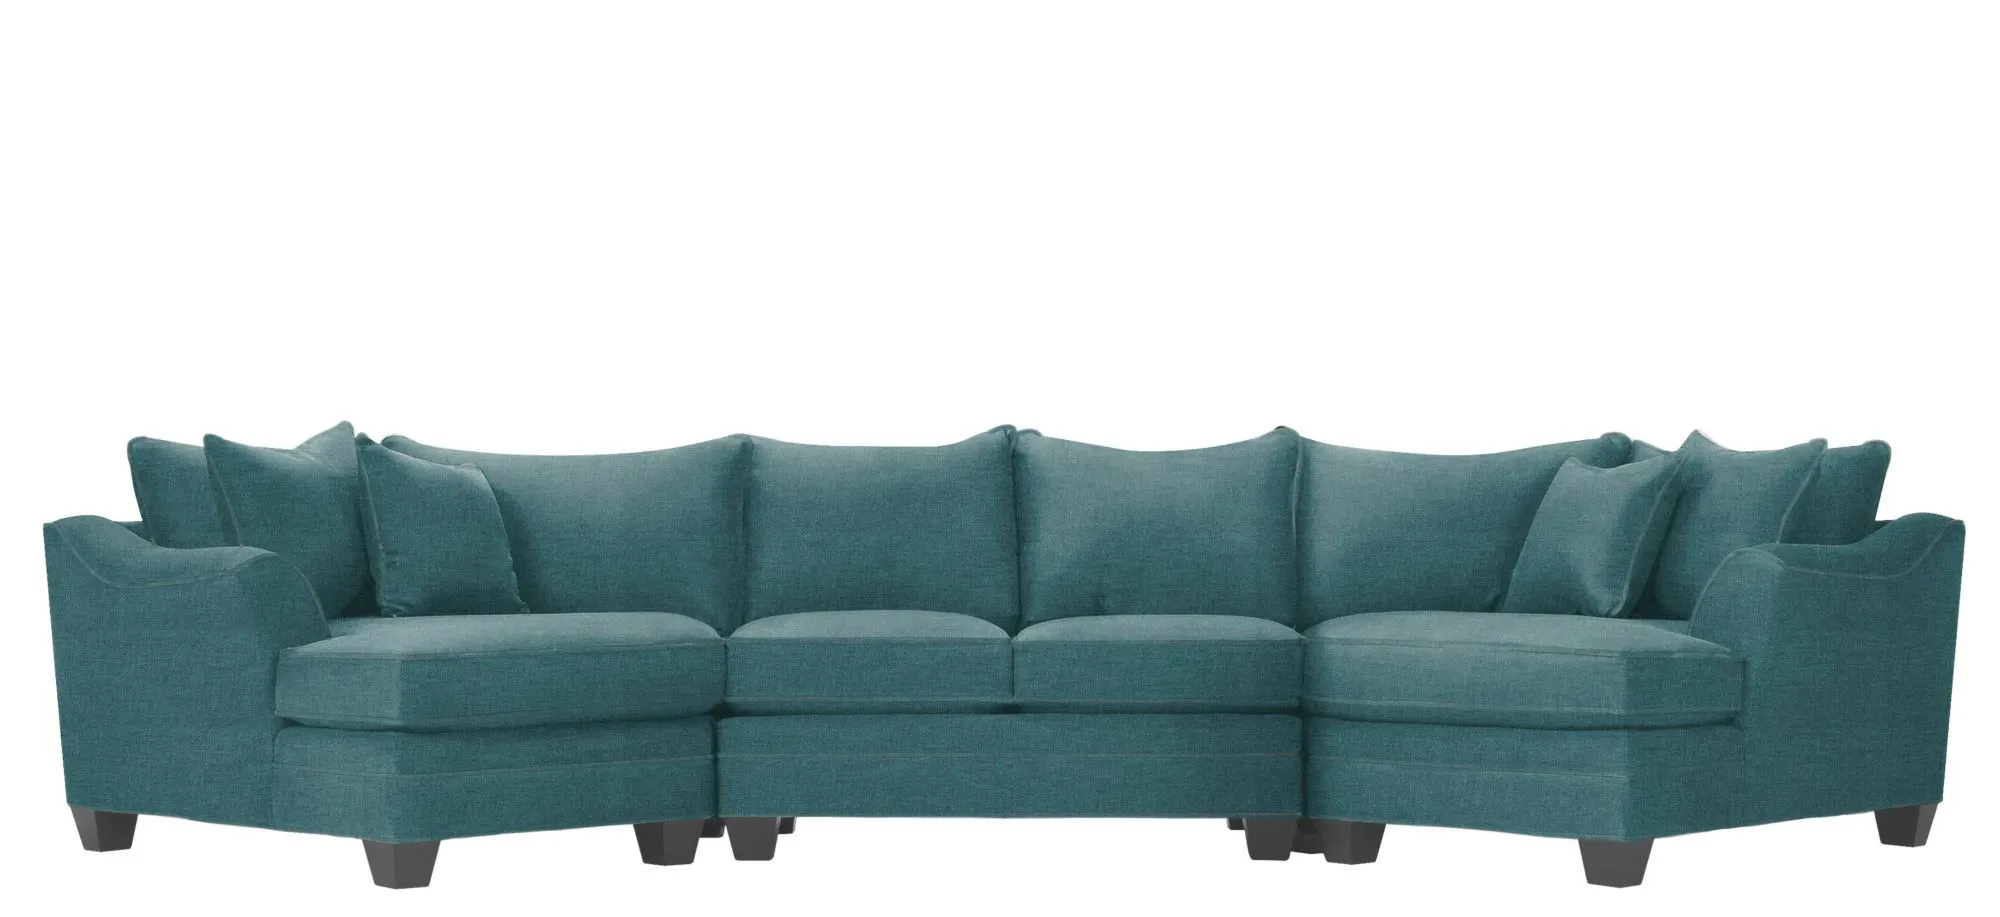 Foresthill 3-pc. Symmetrical Cuddler Sectional Sofa in Santa Rosa Turquoise by H.M. Richards